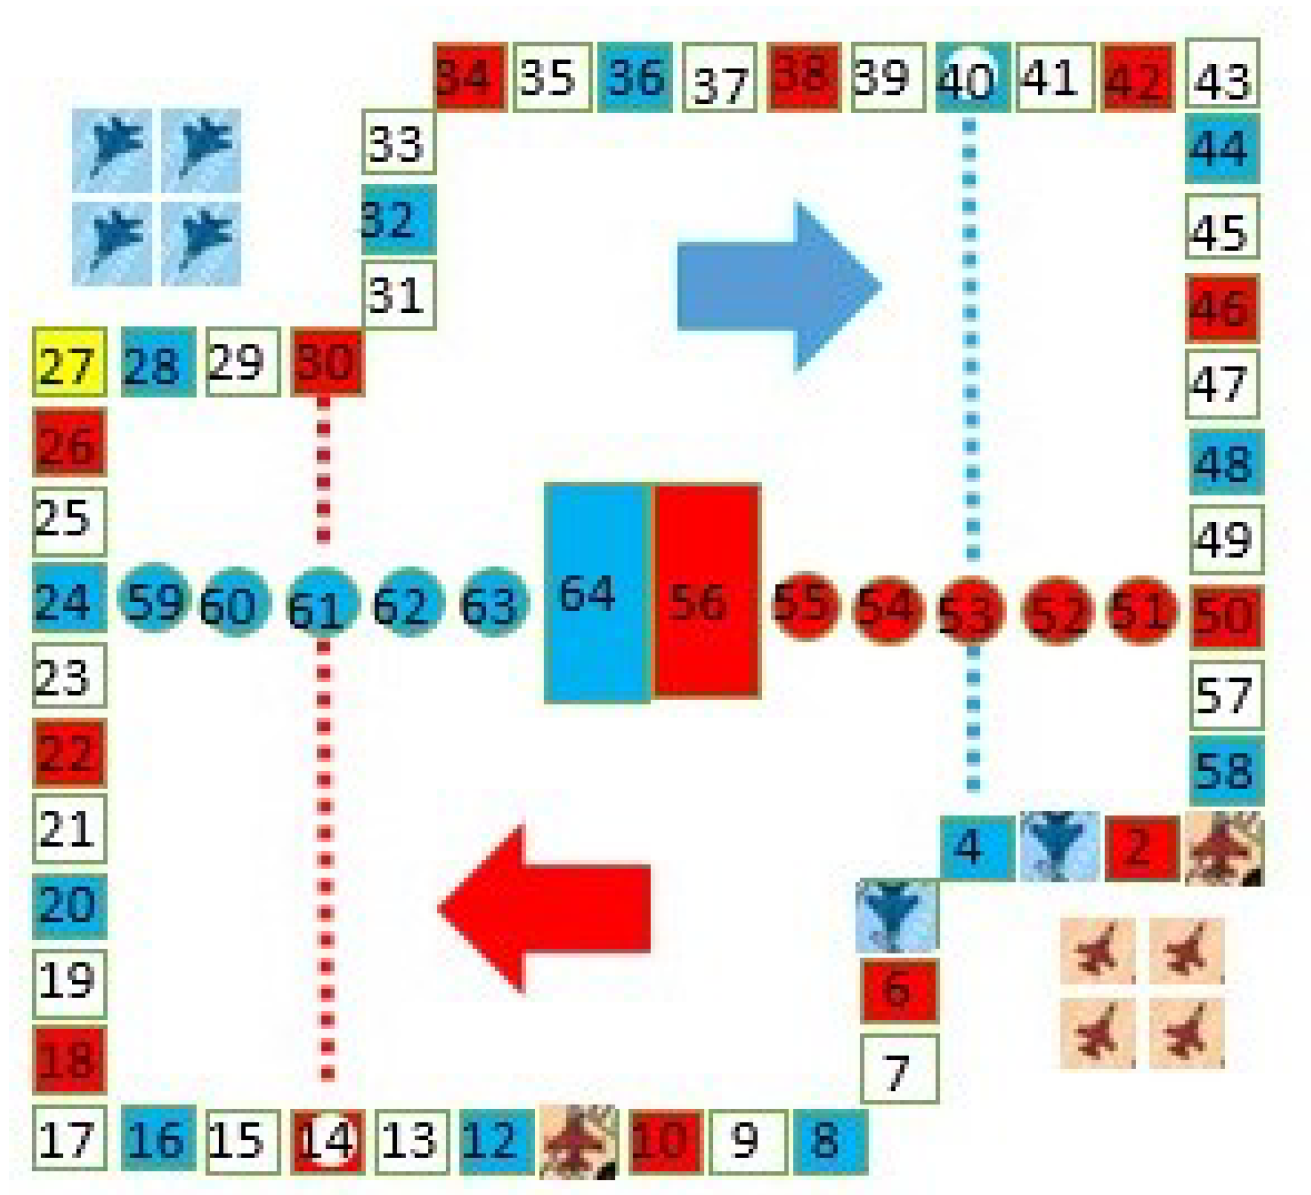 Next Chess Move 3.3.1 Free Download